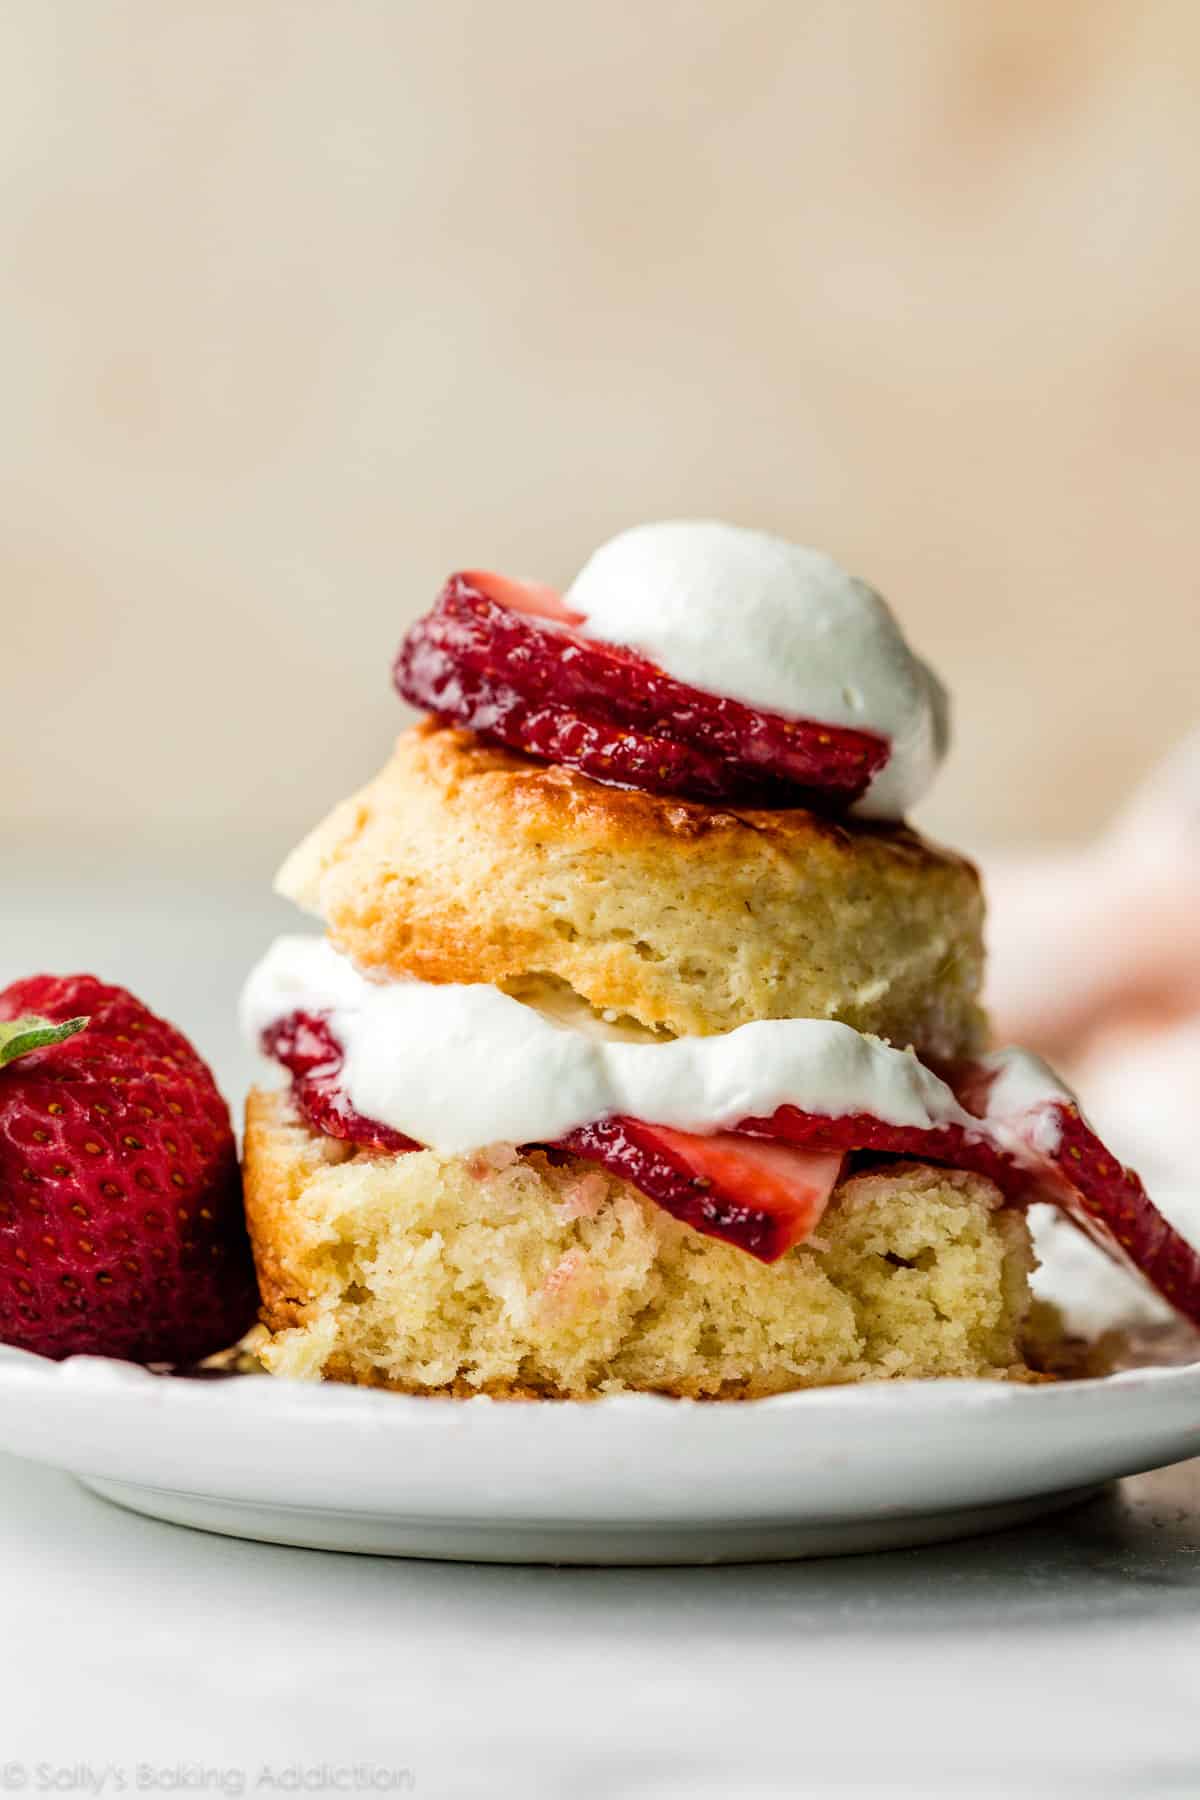 strawberry shortcake with whipped cream on top